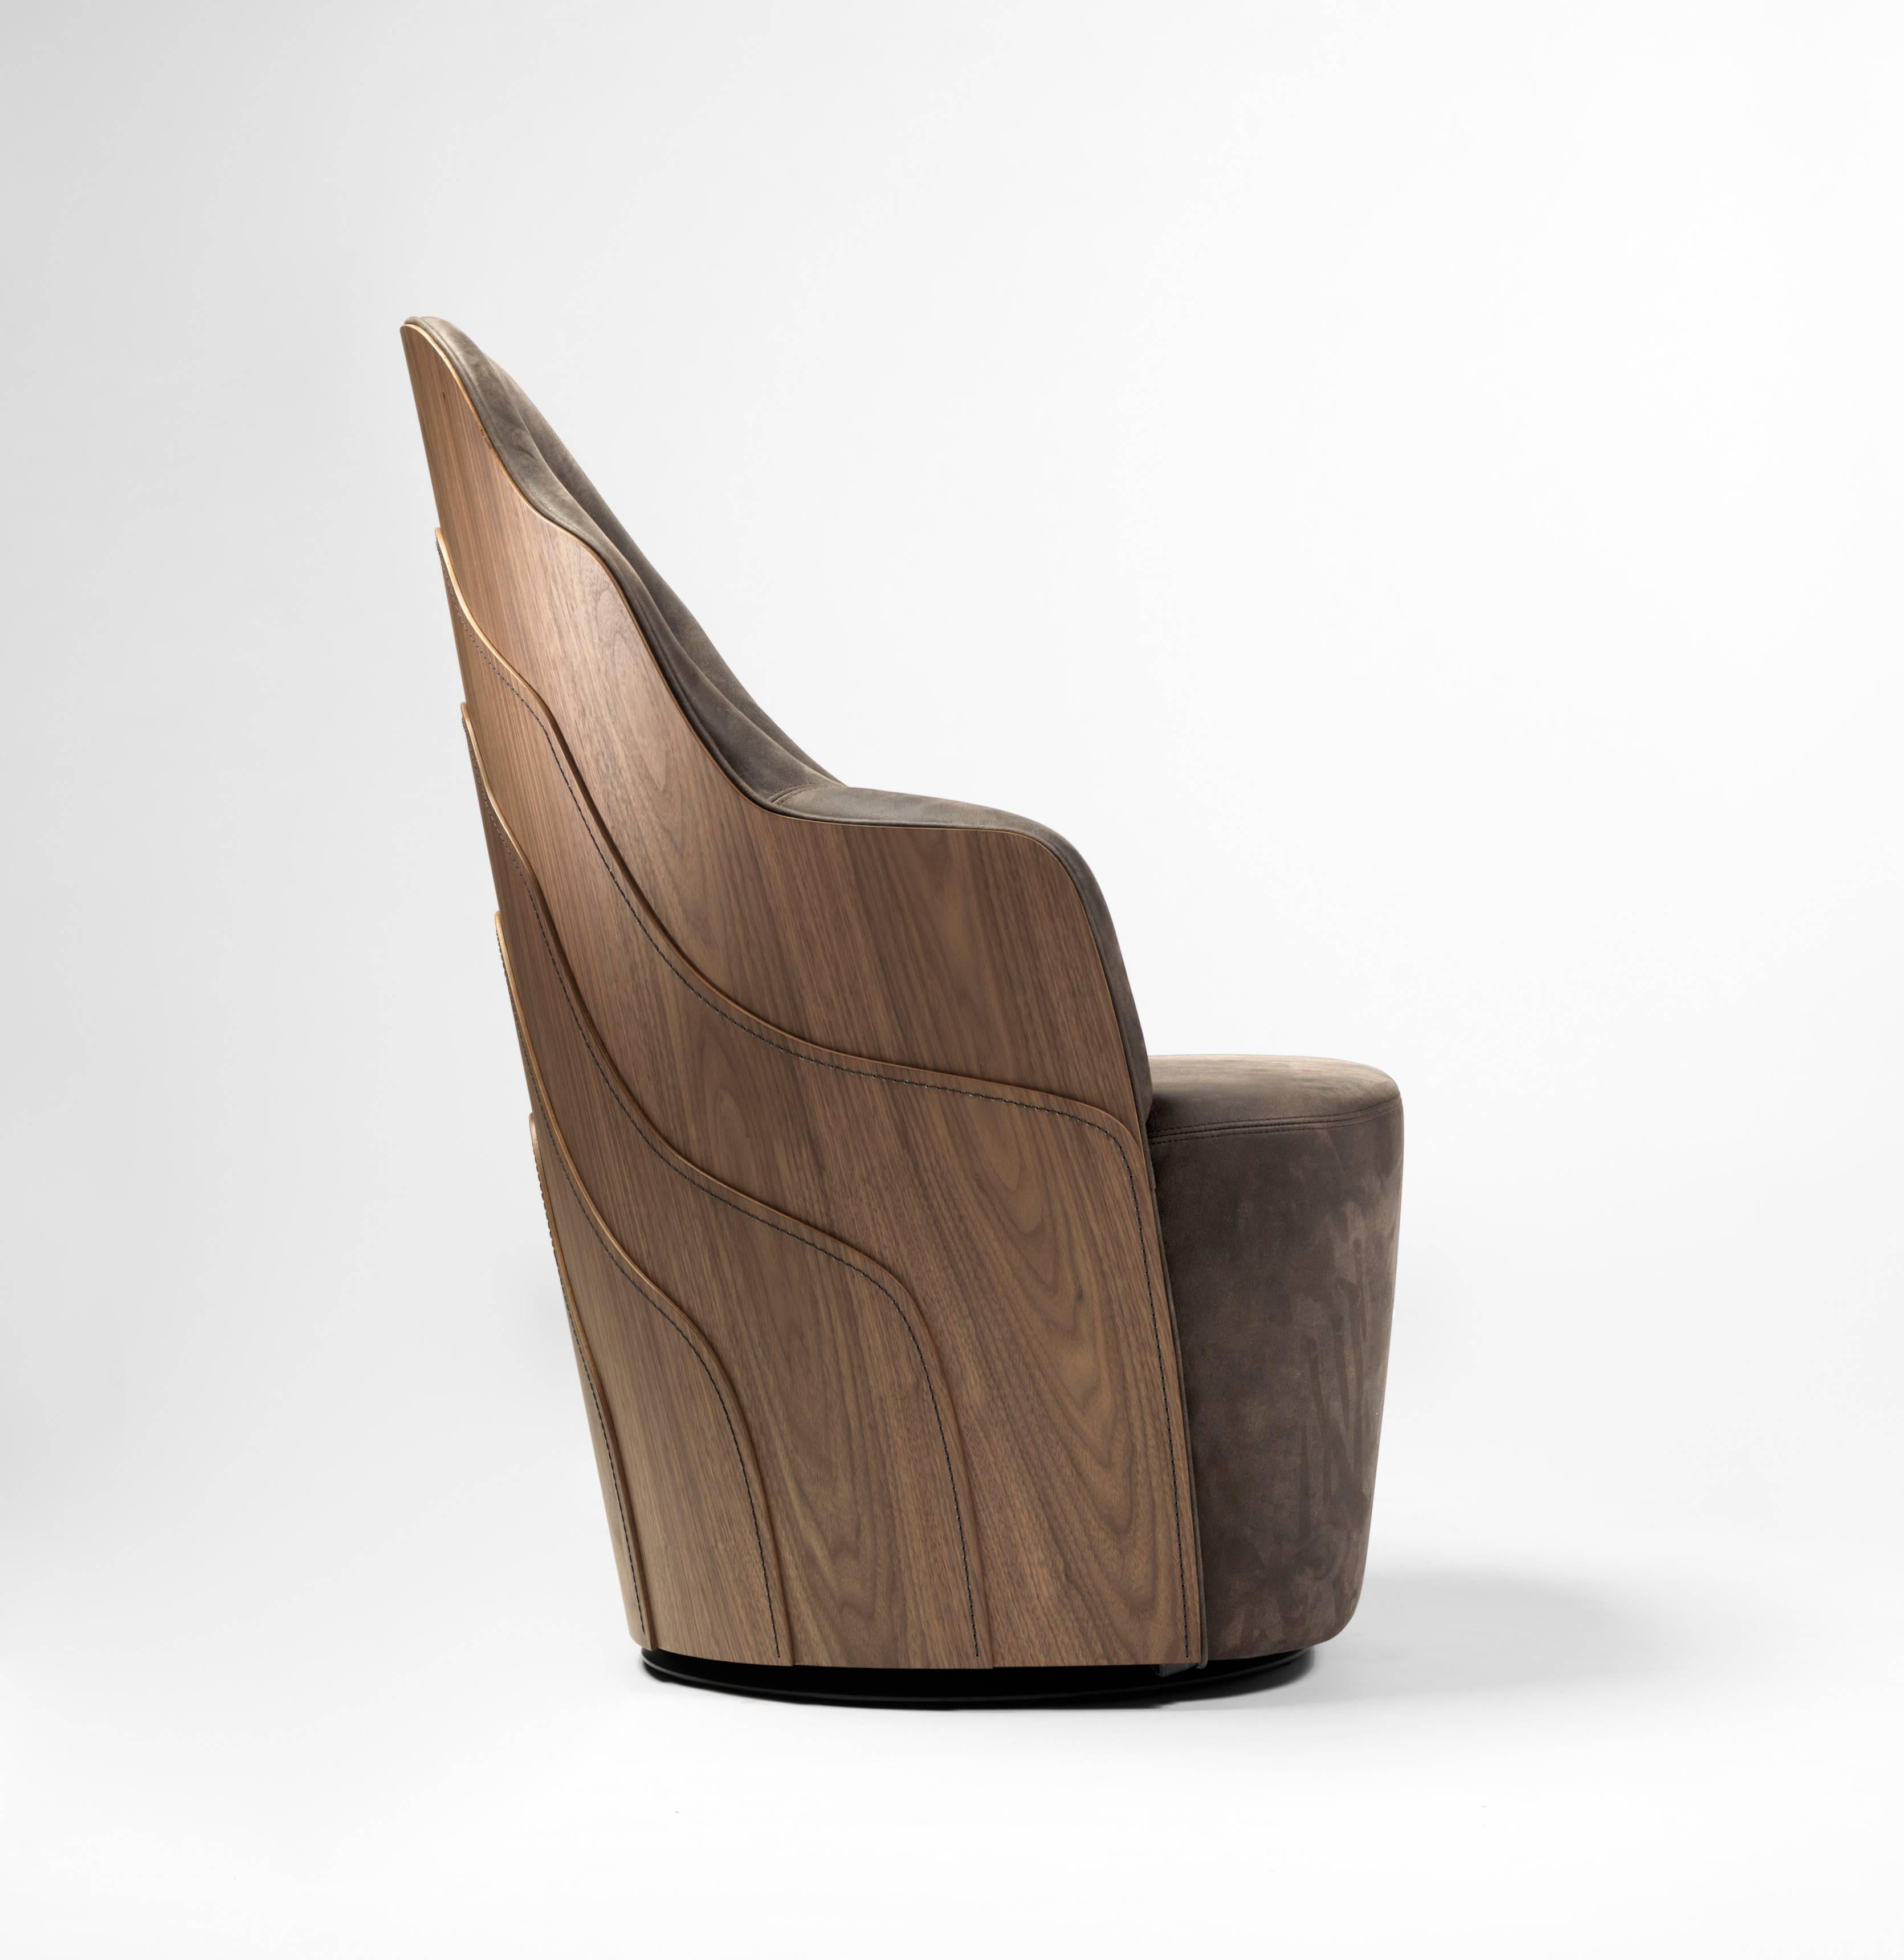 The Couture Armchair is a fusion of artisanal and industrial techniques. The stitches represent a topographic map resulting in an organic pattern, simulating the growth in wood. The use of gradient colours for the wood, amplifies the effect of